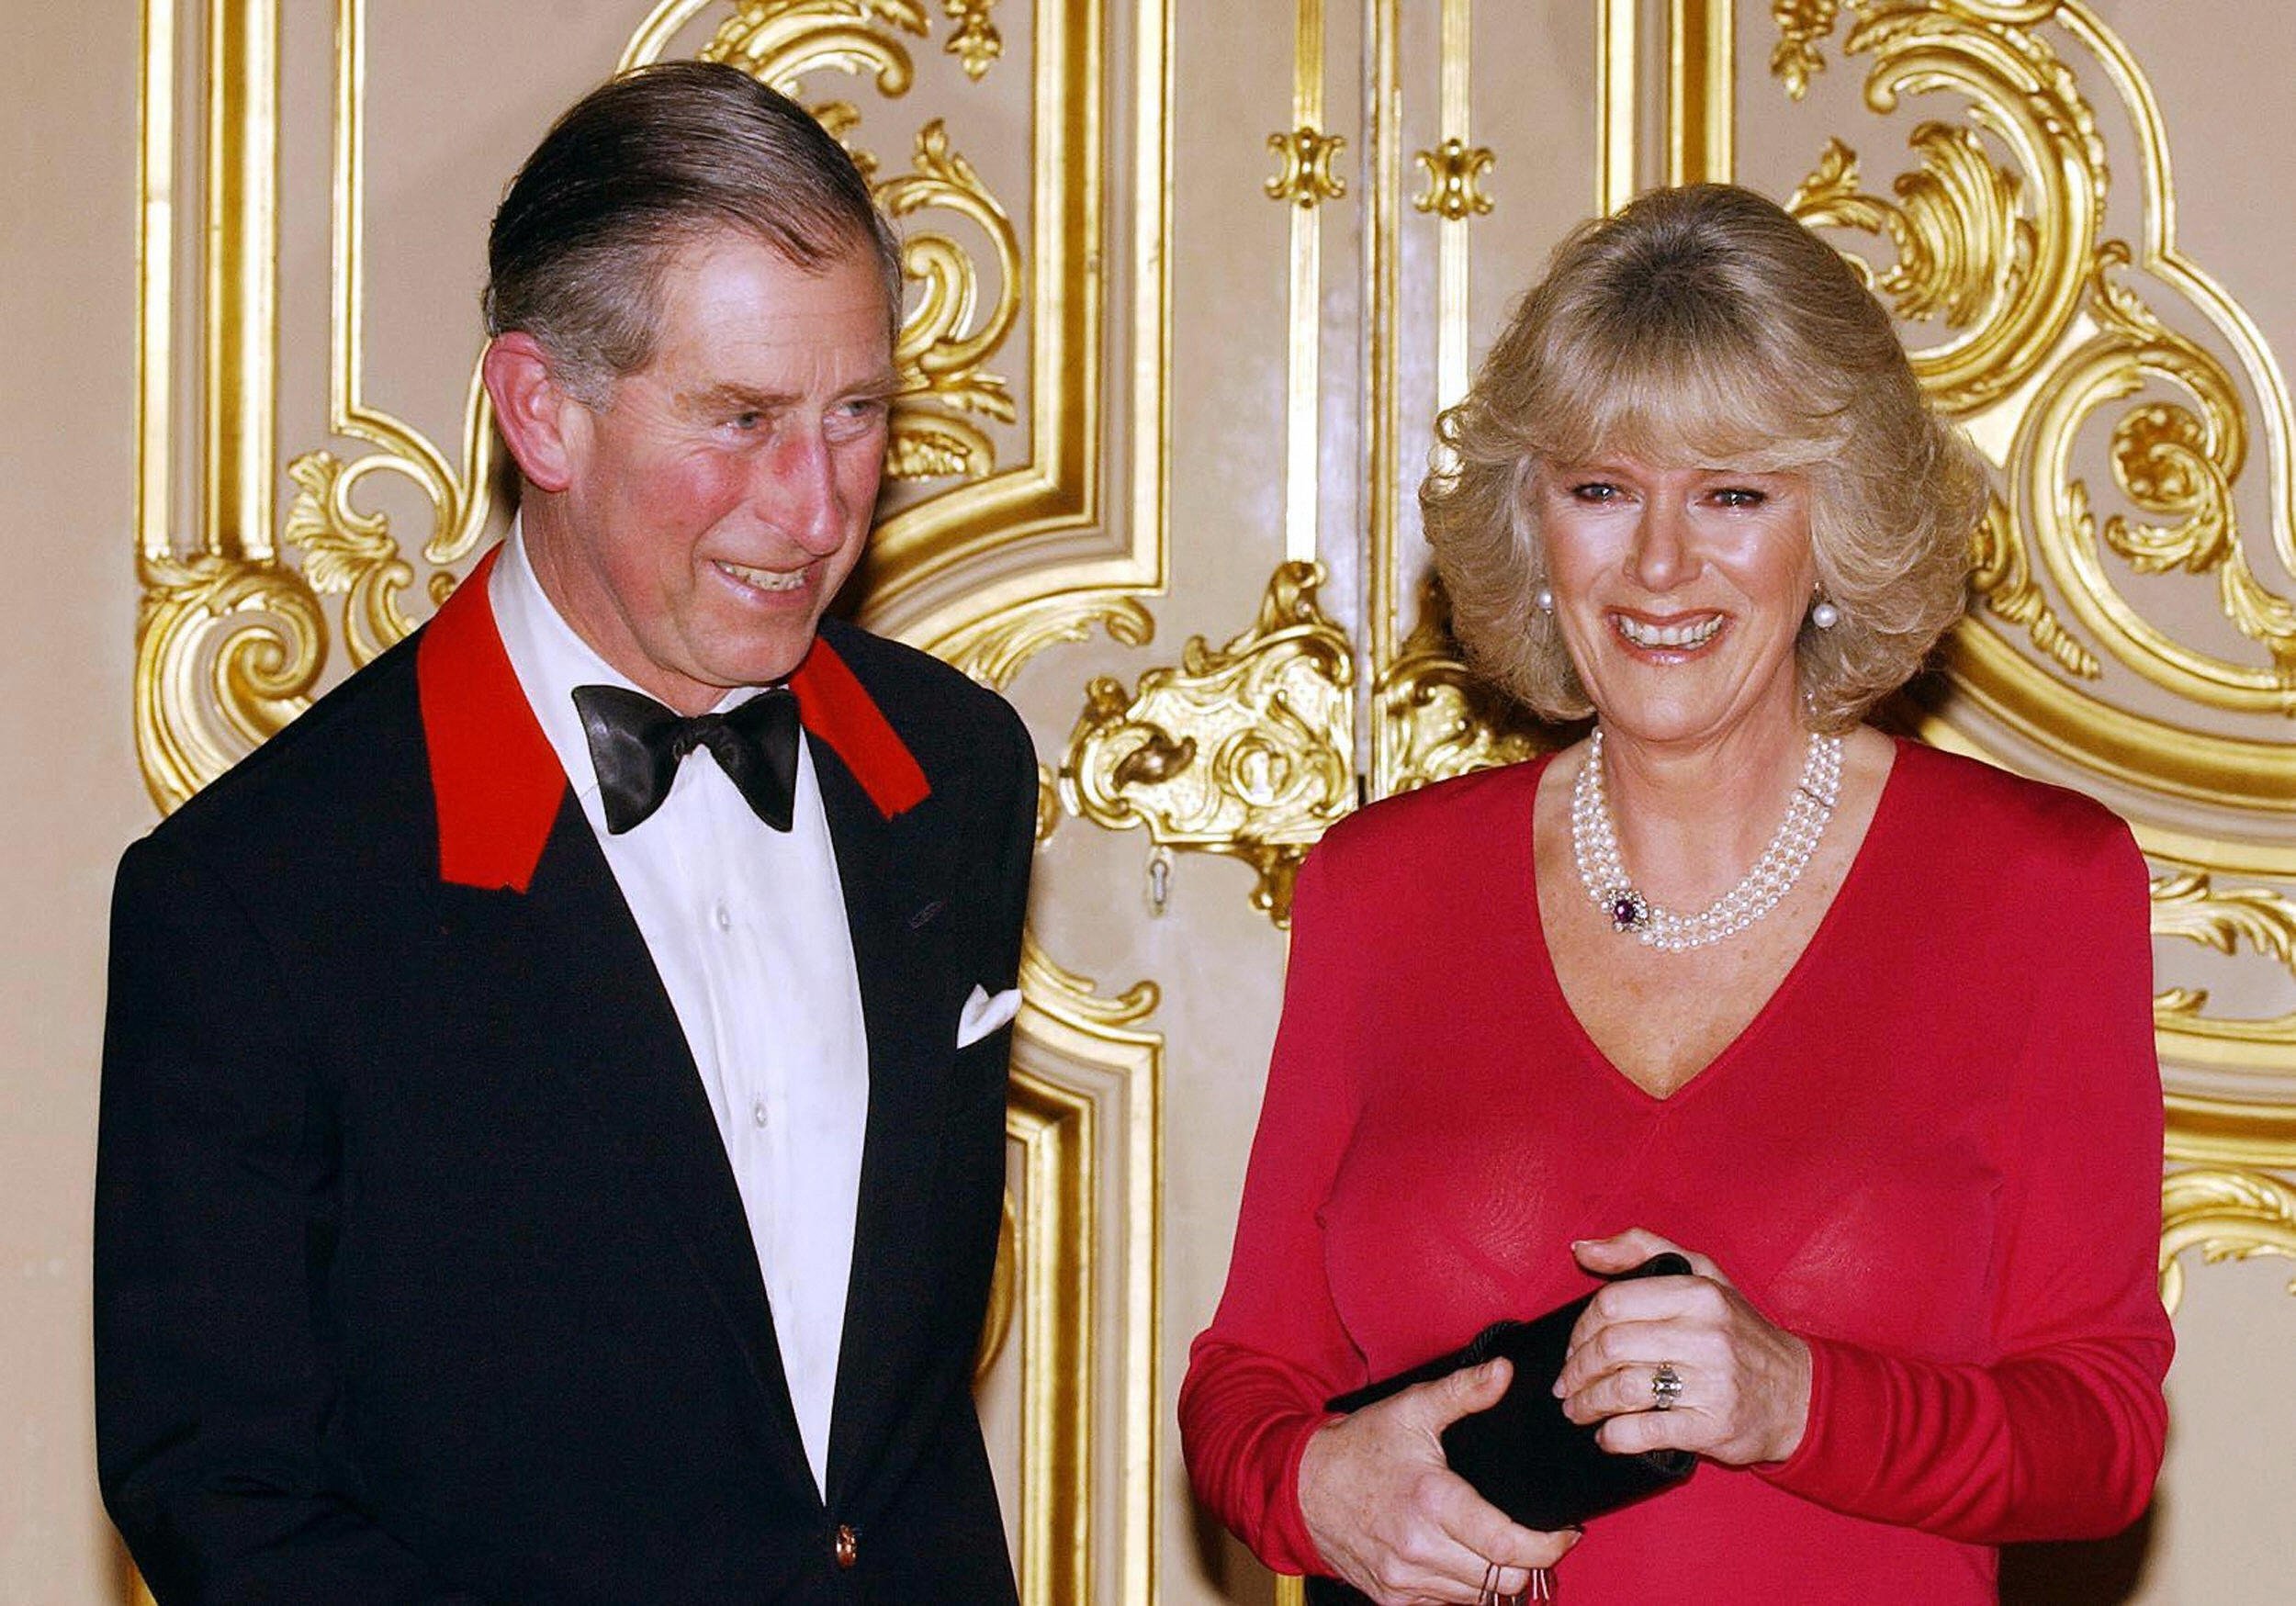 King Charles and Camilla Queen Consort | JOHN STILLWELL/AFP via Getty Images